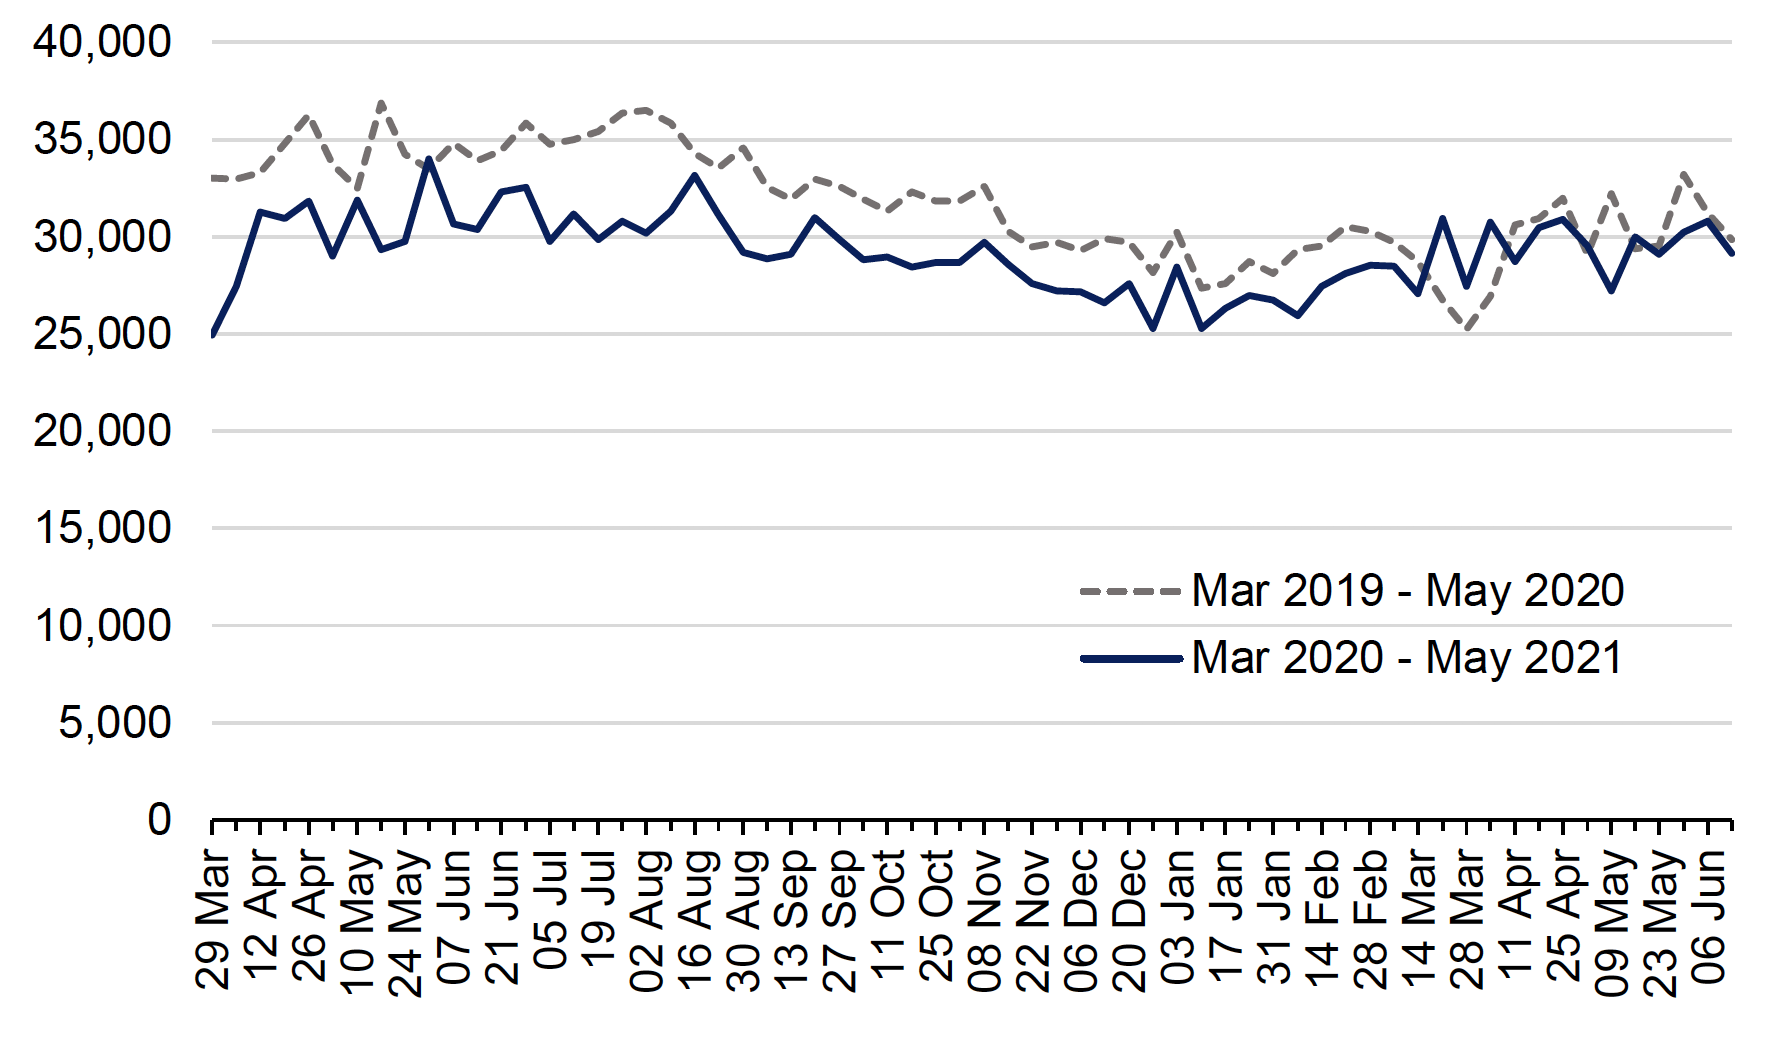 Line graph showing incidents recorded by Police Scotland in March 2019-May 2020, compared to March 2020-May 2021.